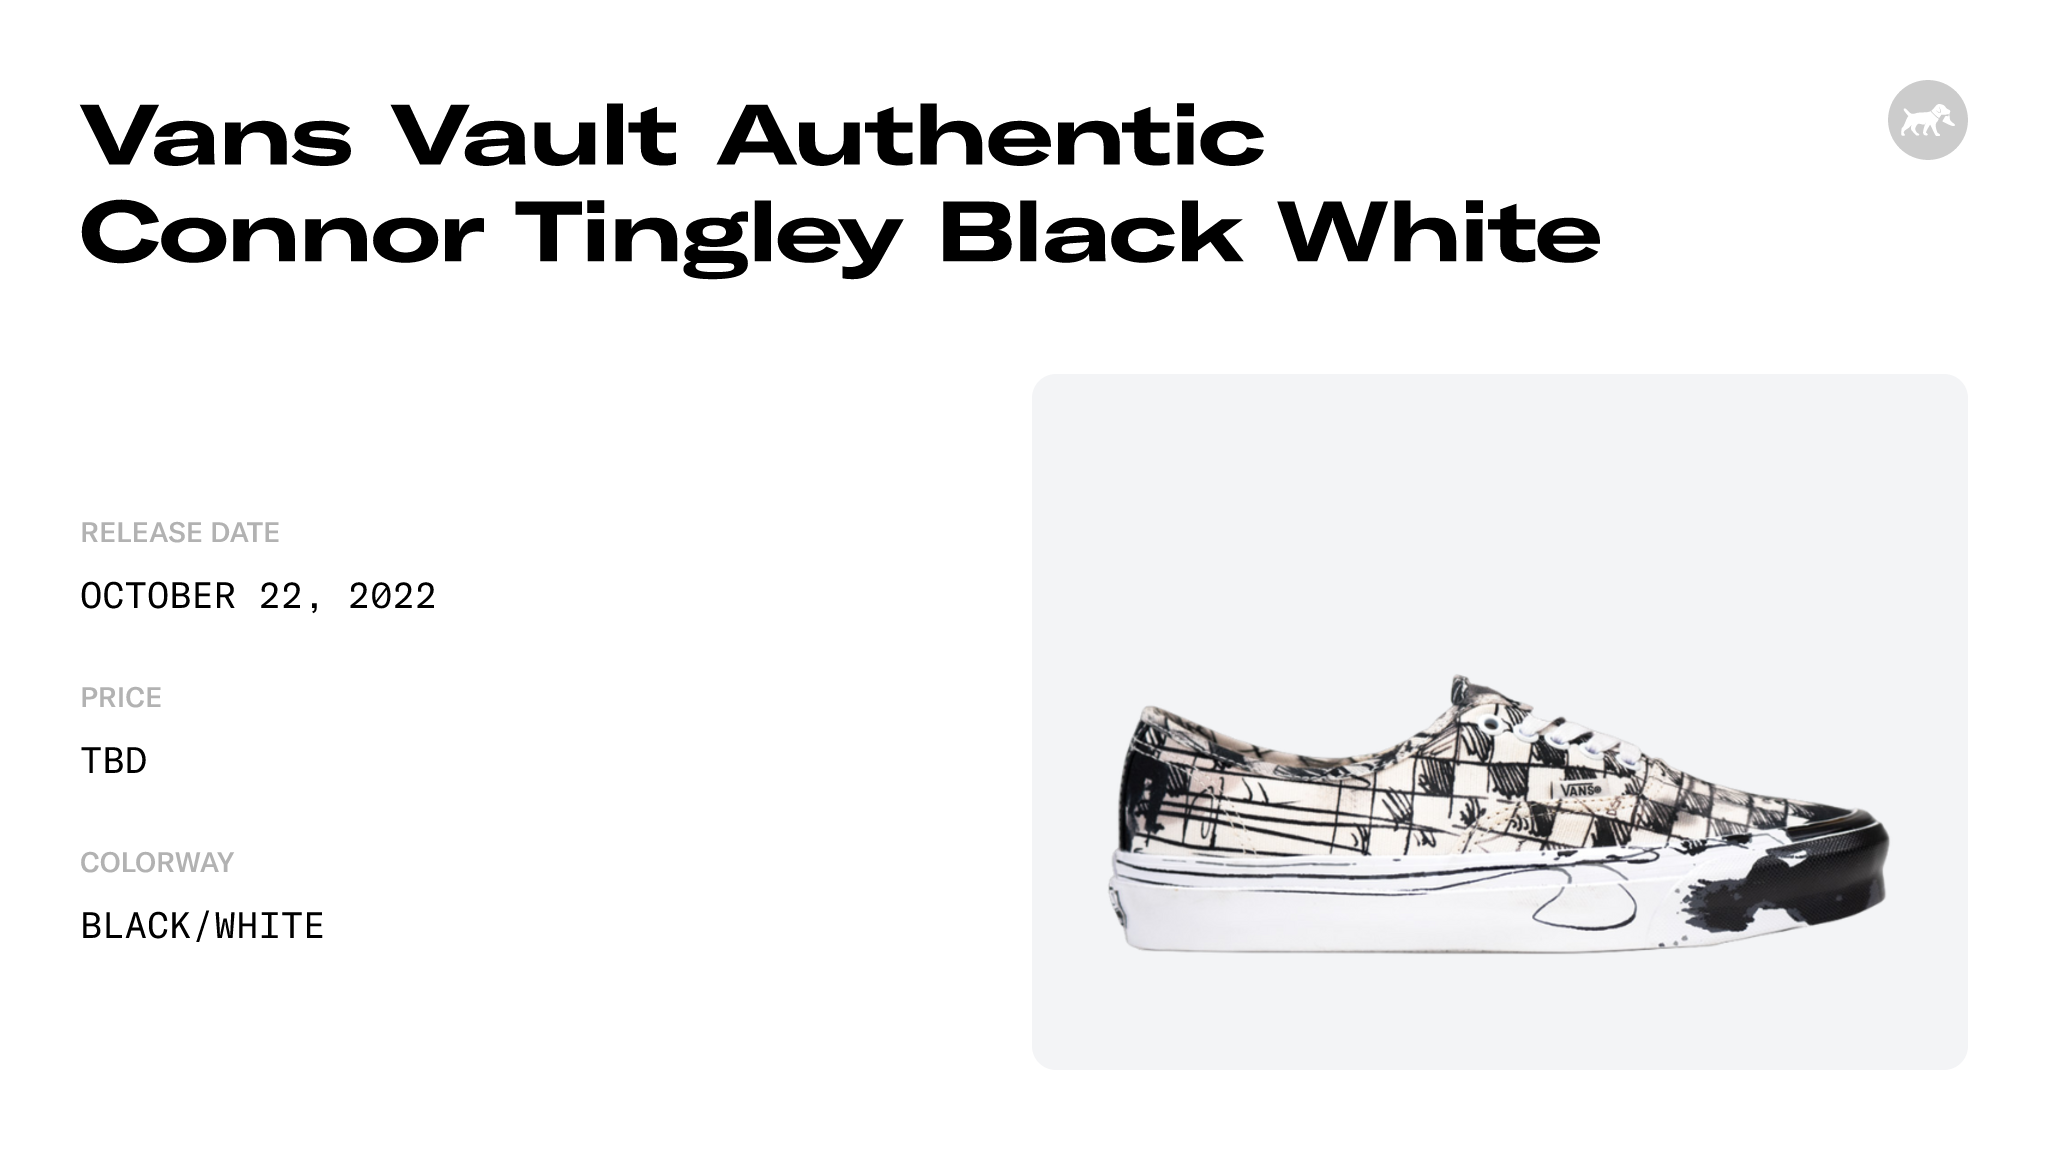 Vans Vault Authentic Connor Tingley Black White Raffles and Release Date